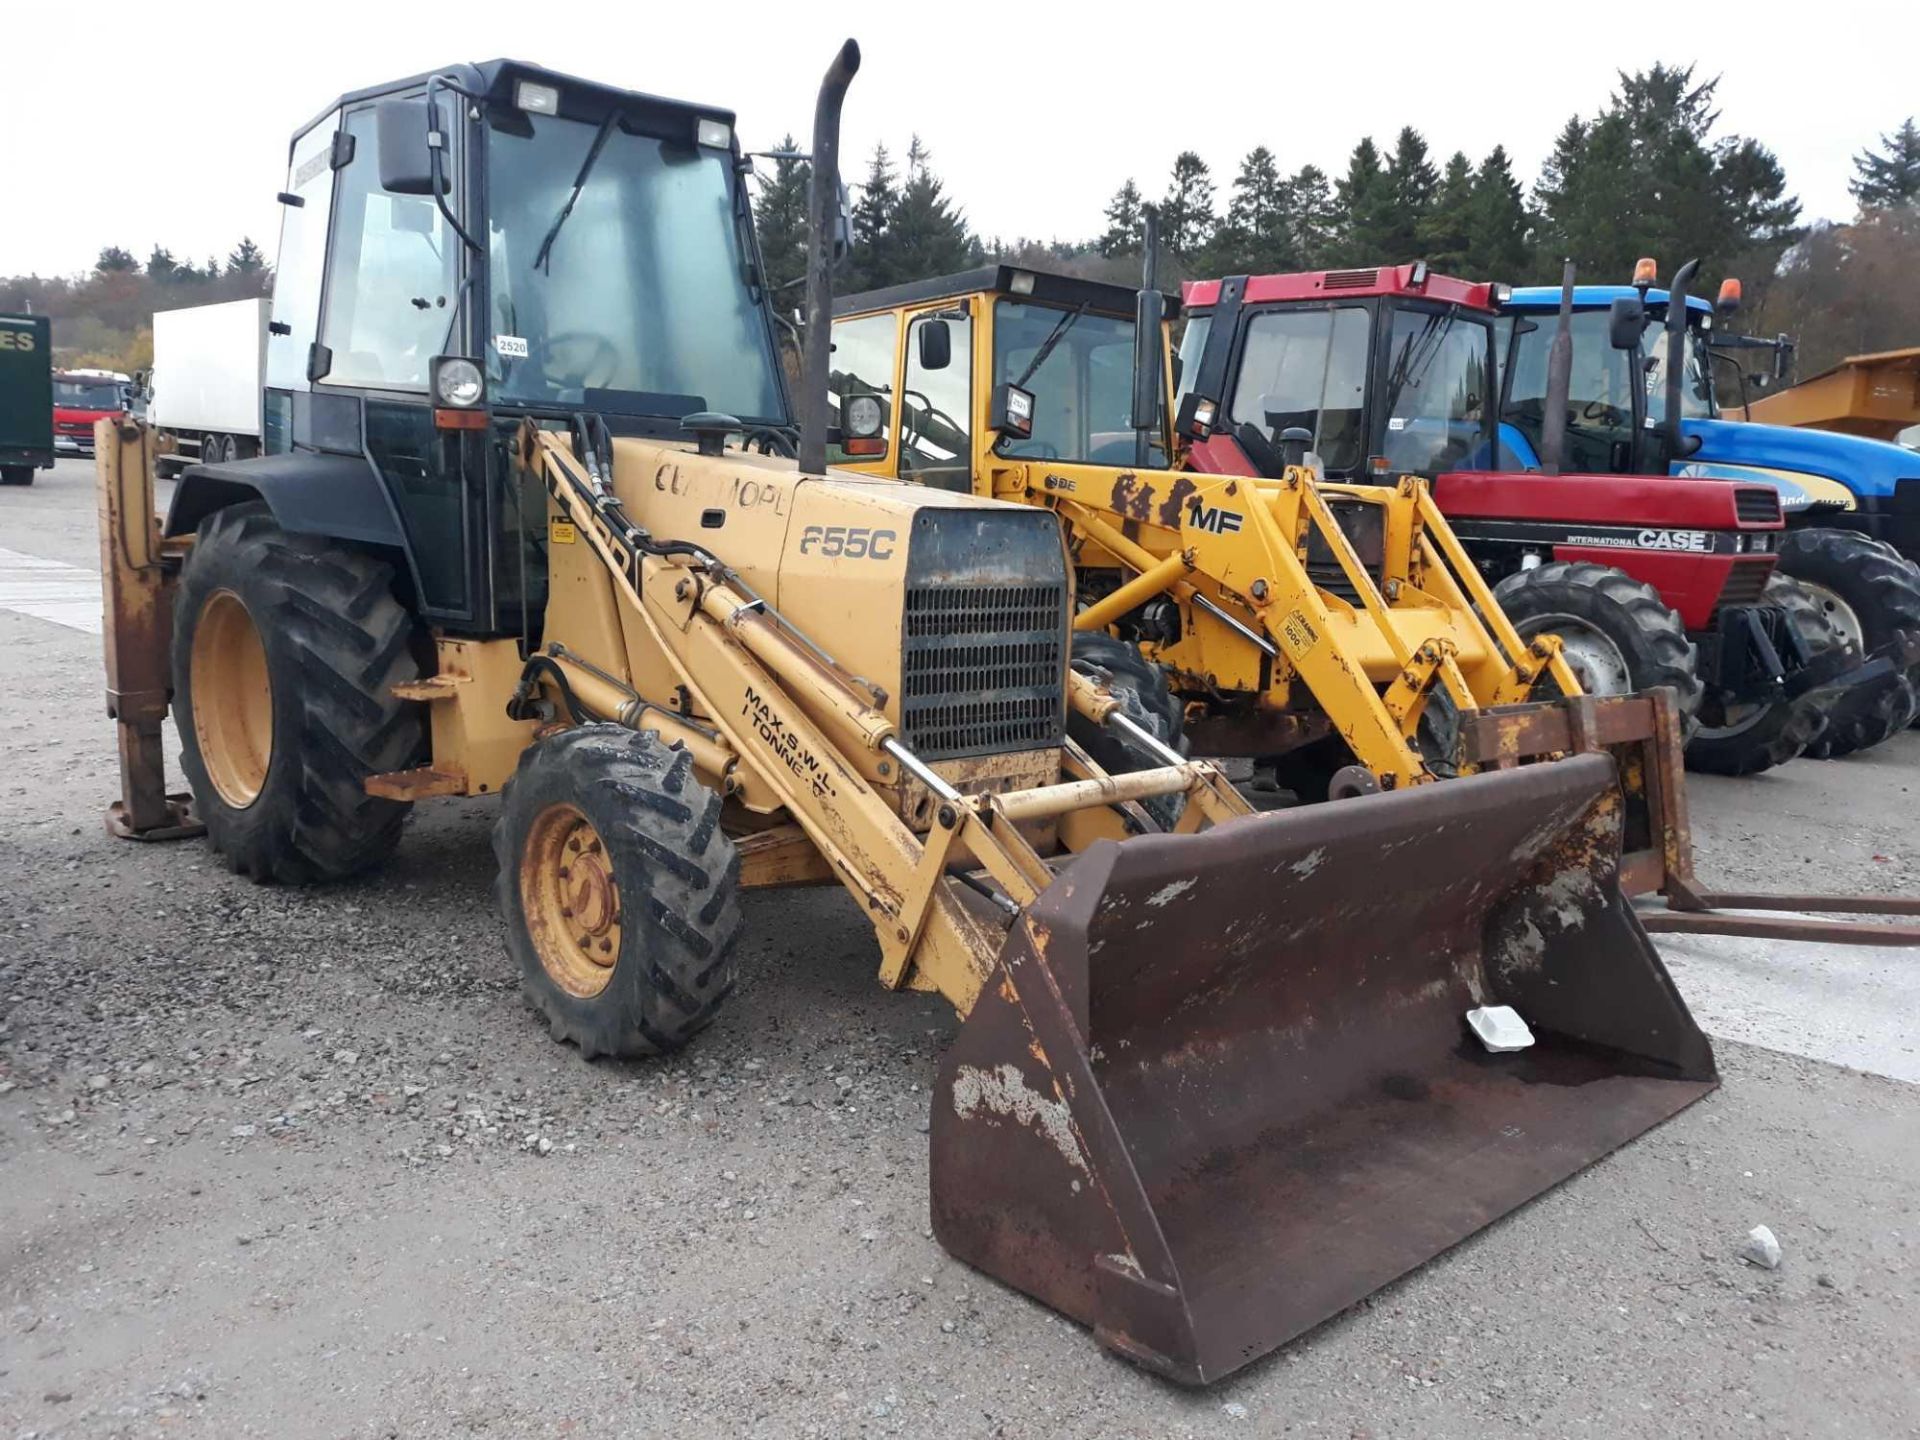 Ford New Holland Digger 655c- 0cc X - Other